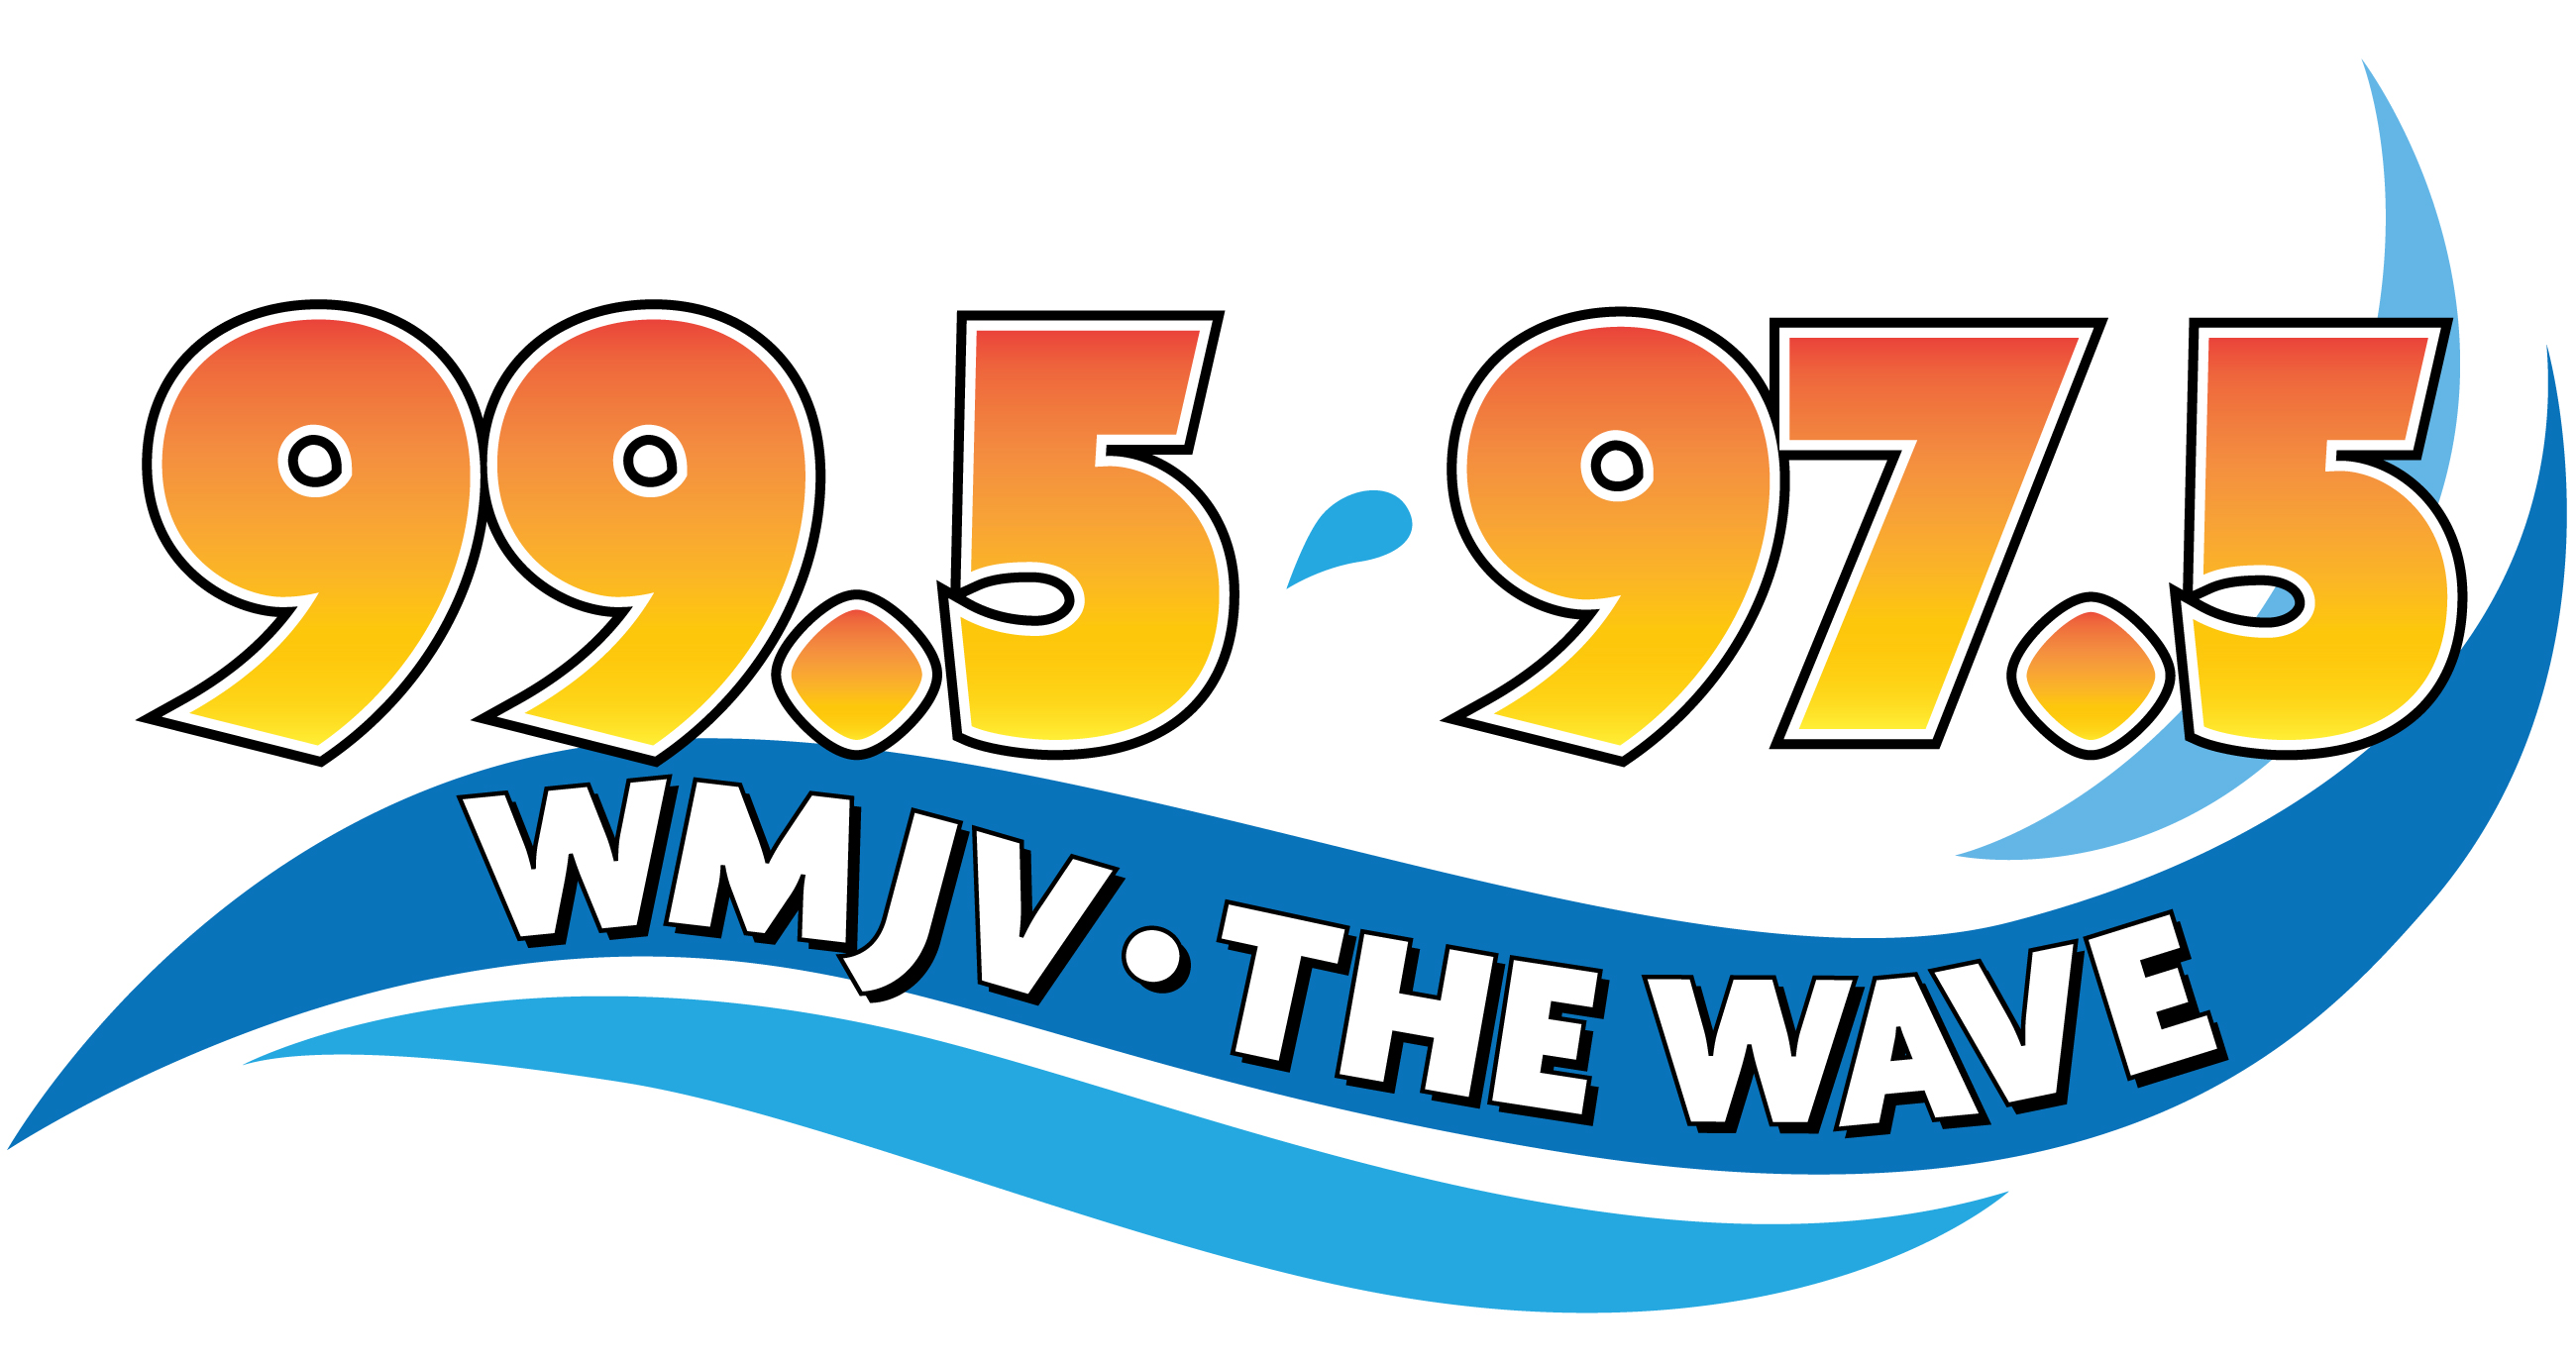 99.5 The Wave